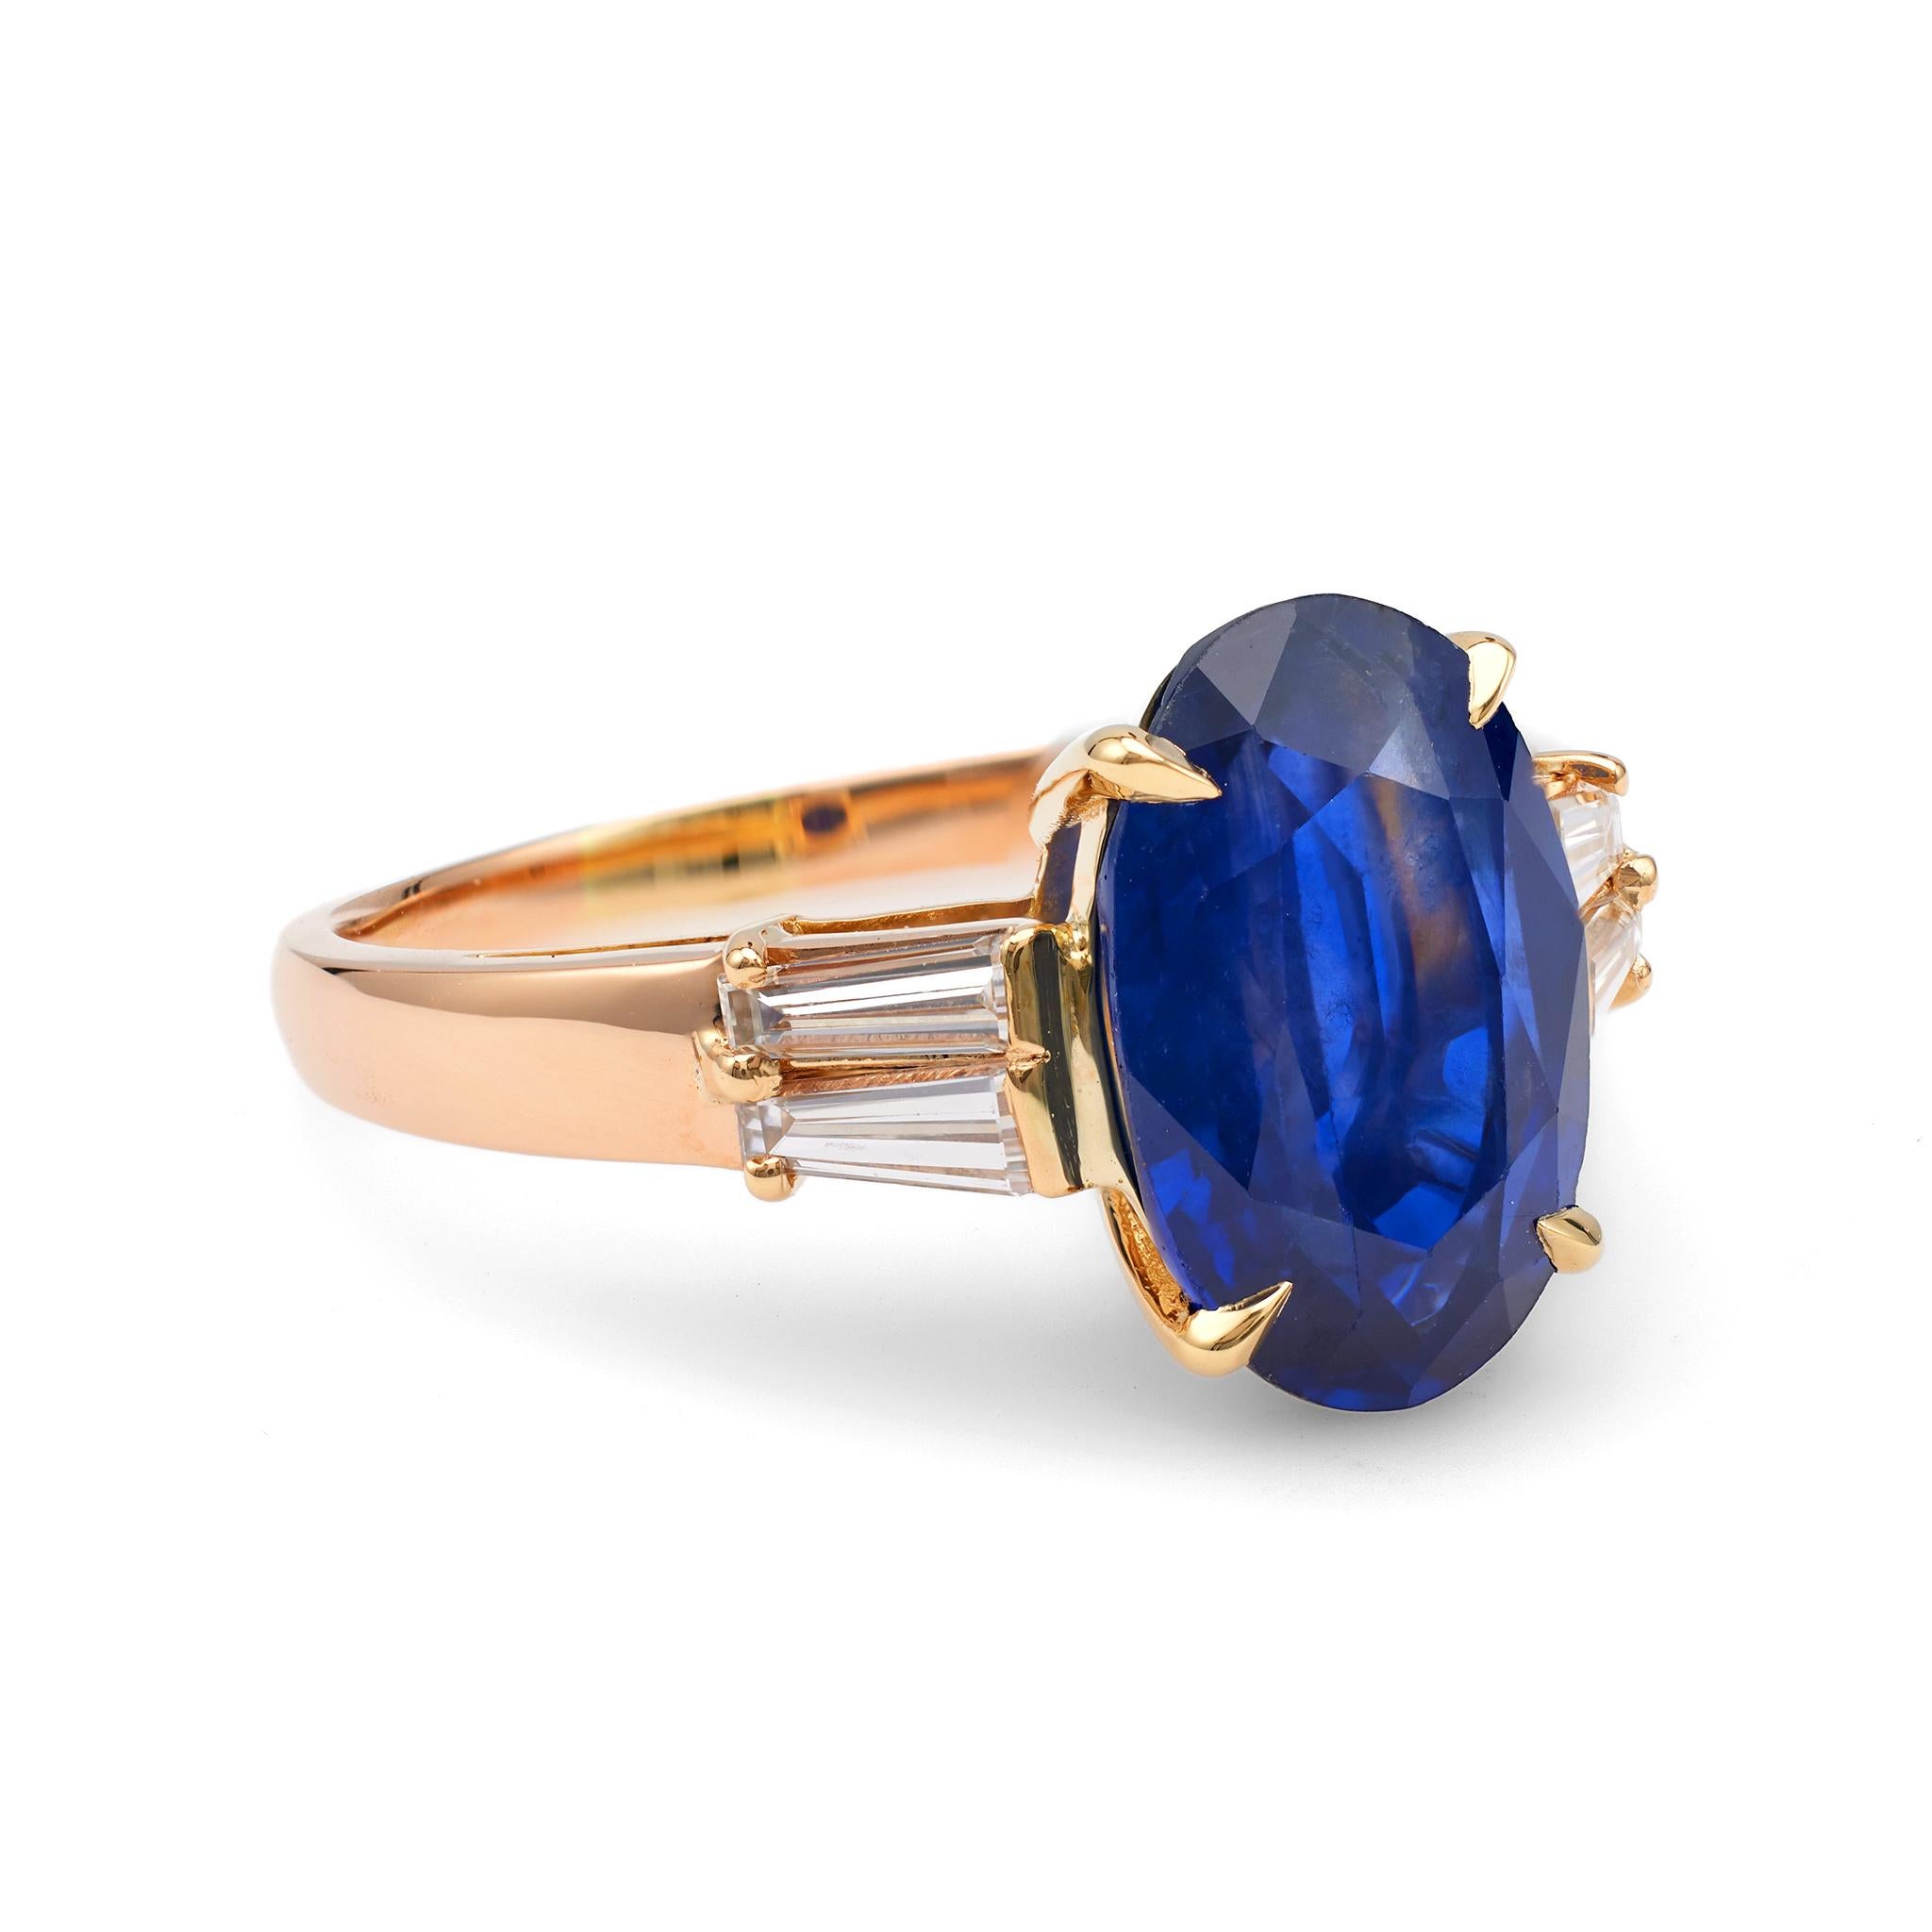 Vintage French GIA 4.73 Carat Ceylon Sapphire Diamond 18k Yellow Gold Ring In Good Condition For Sale In Beverly Hills, CA